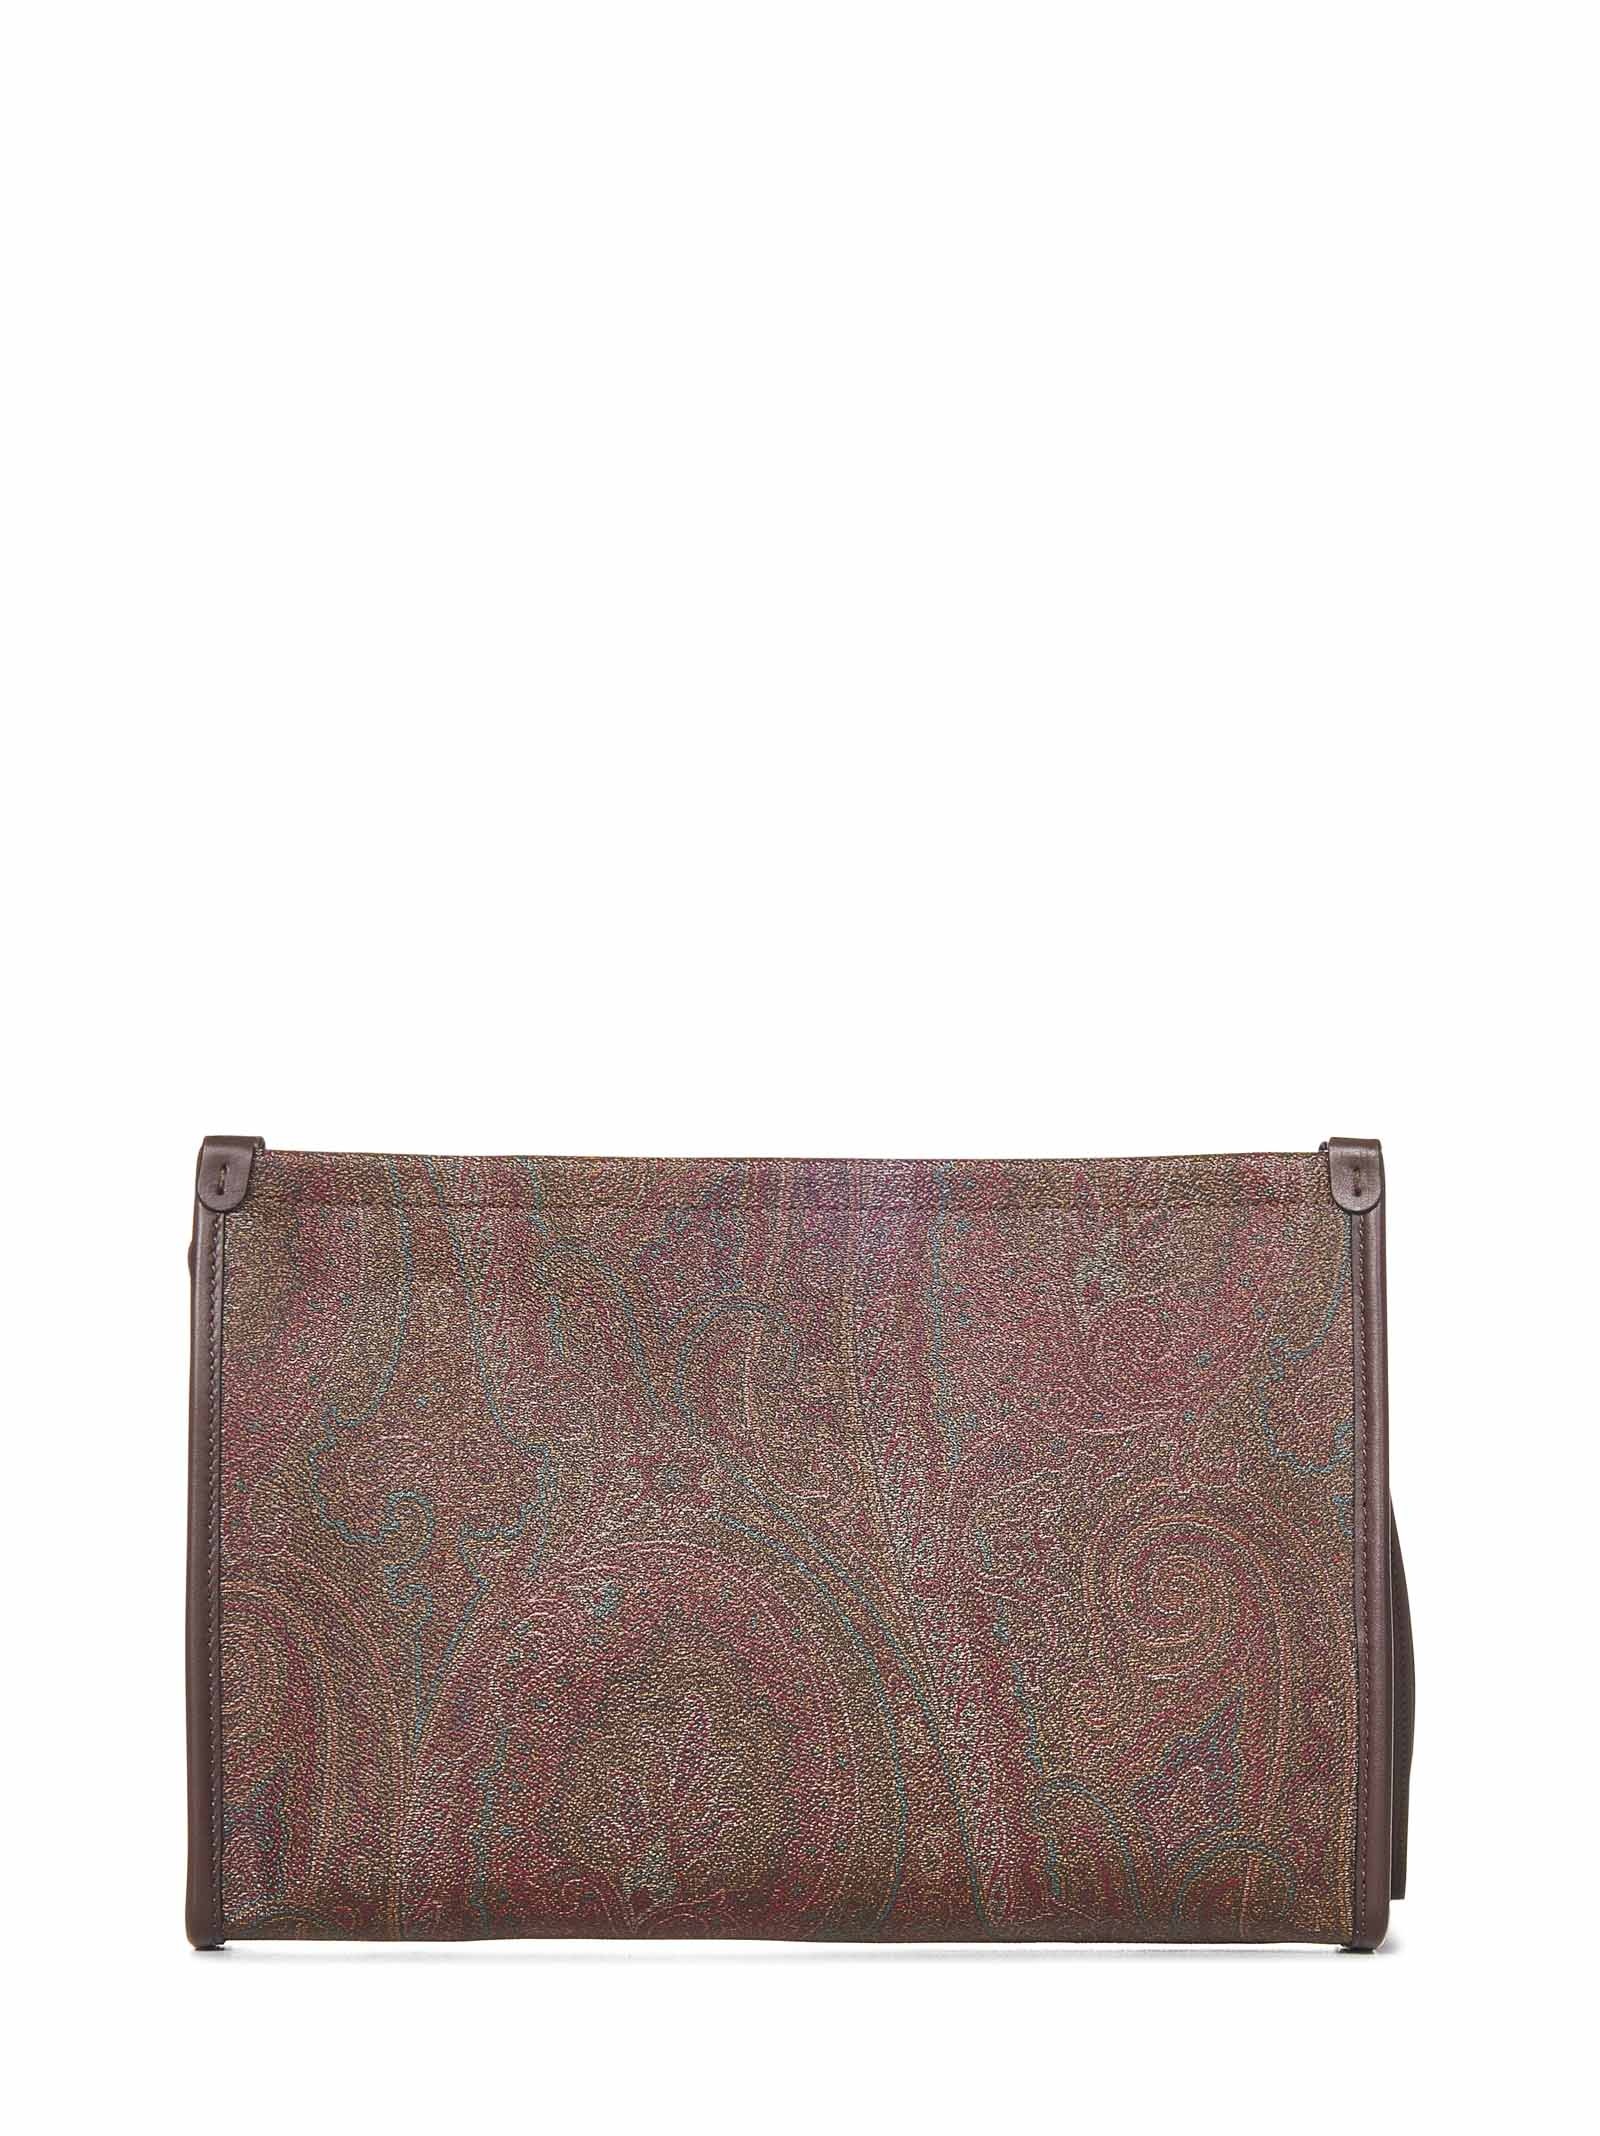 CLUTCH LOVE TROTTER PAISLEY ETRO - 3